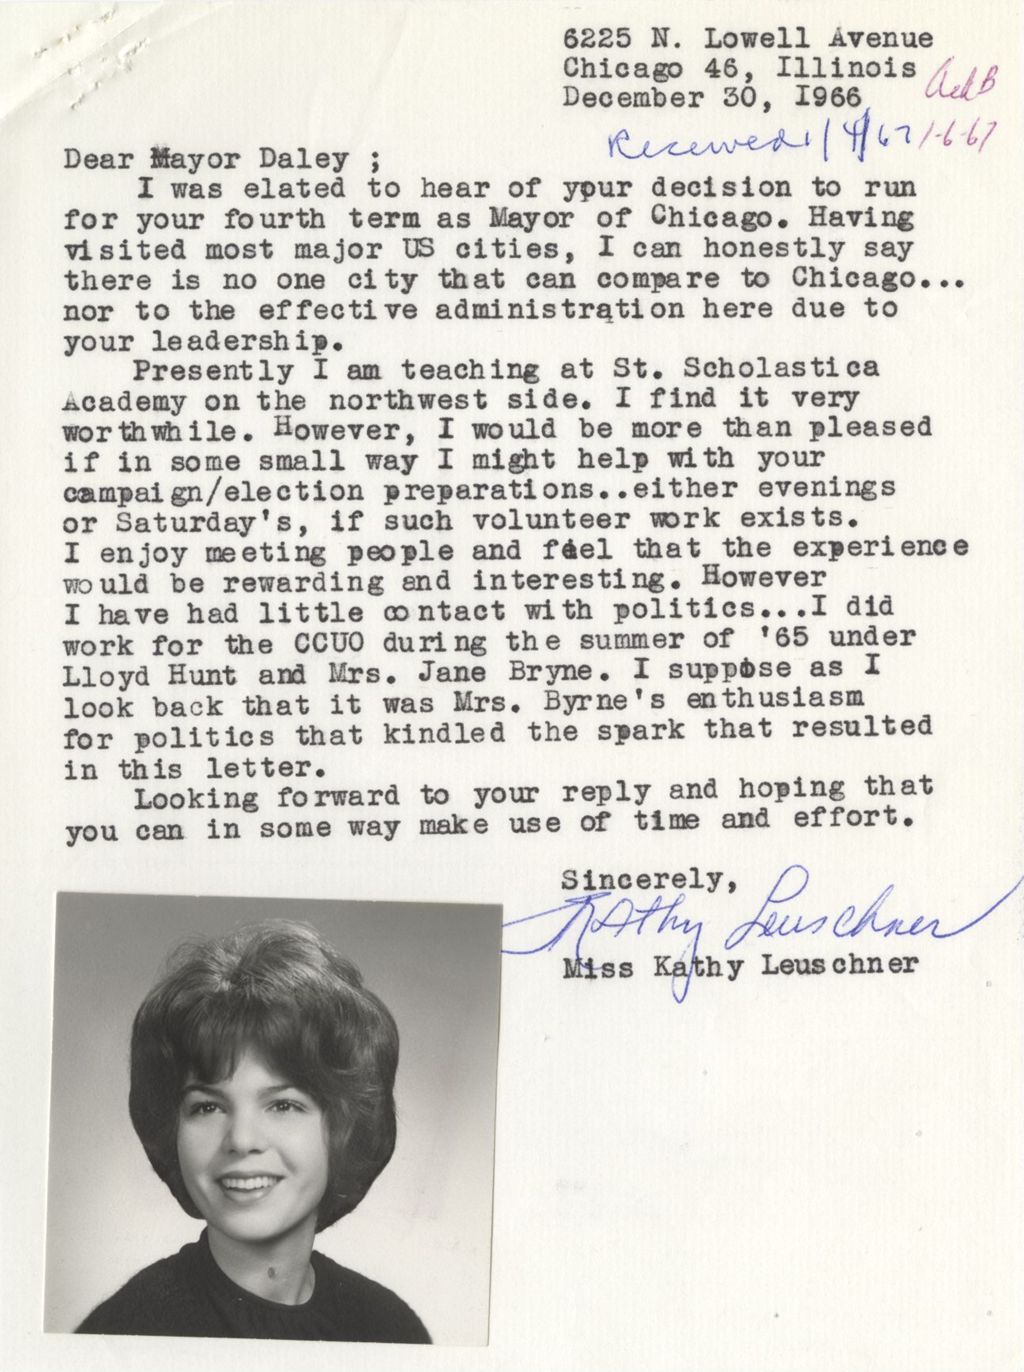 Miniature of Letter to Richard J. Daley from Kathy Leuschner